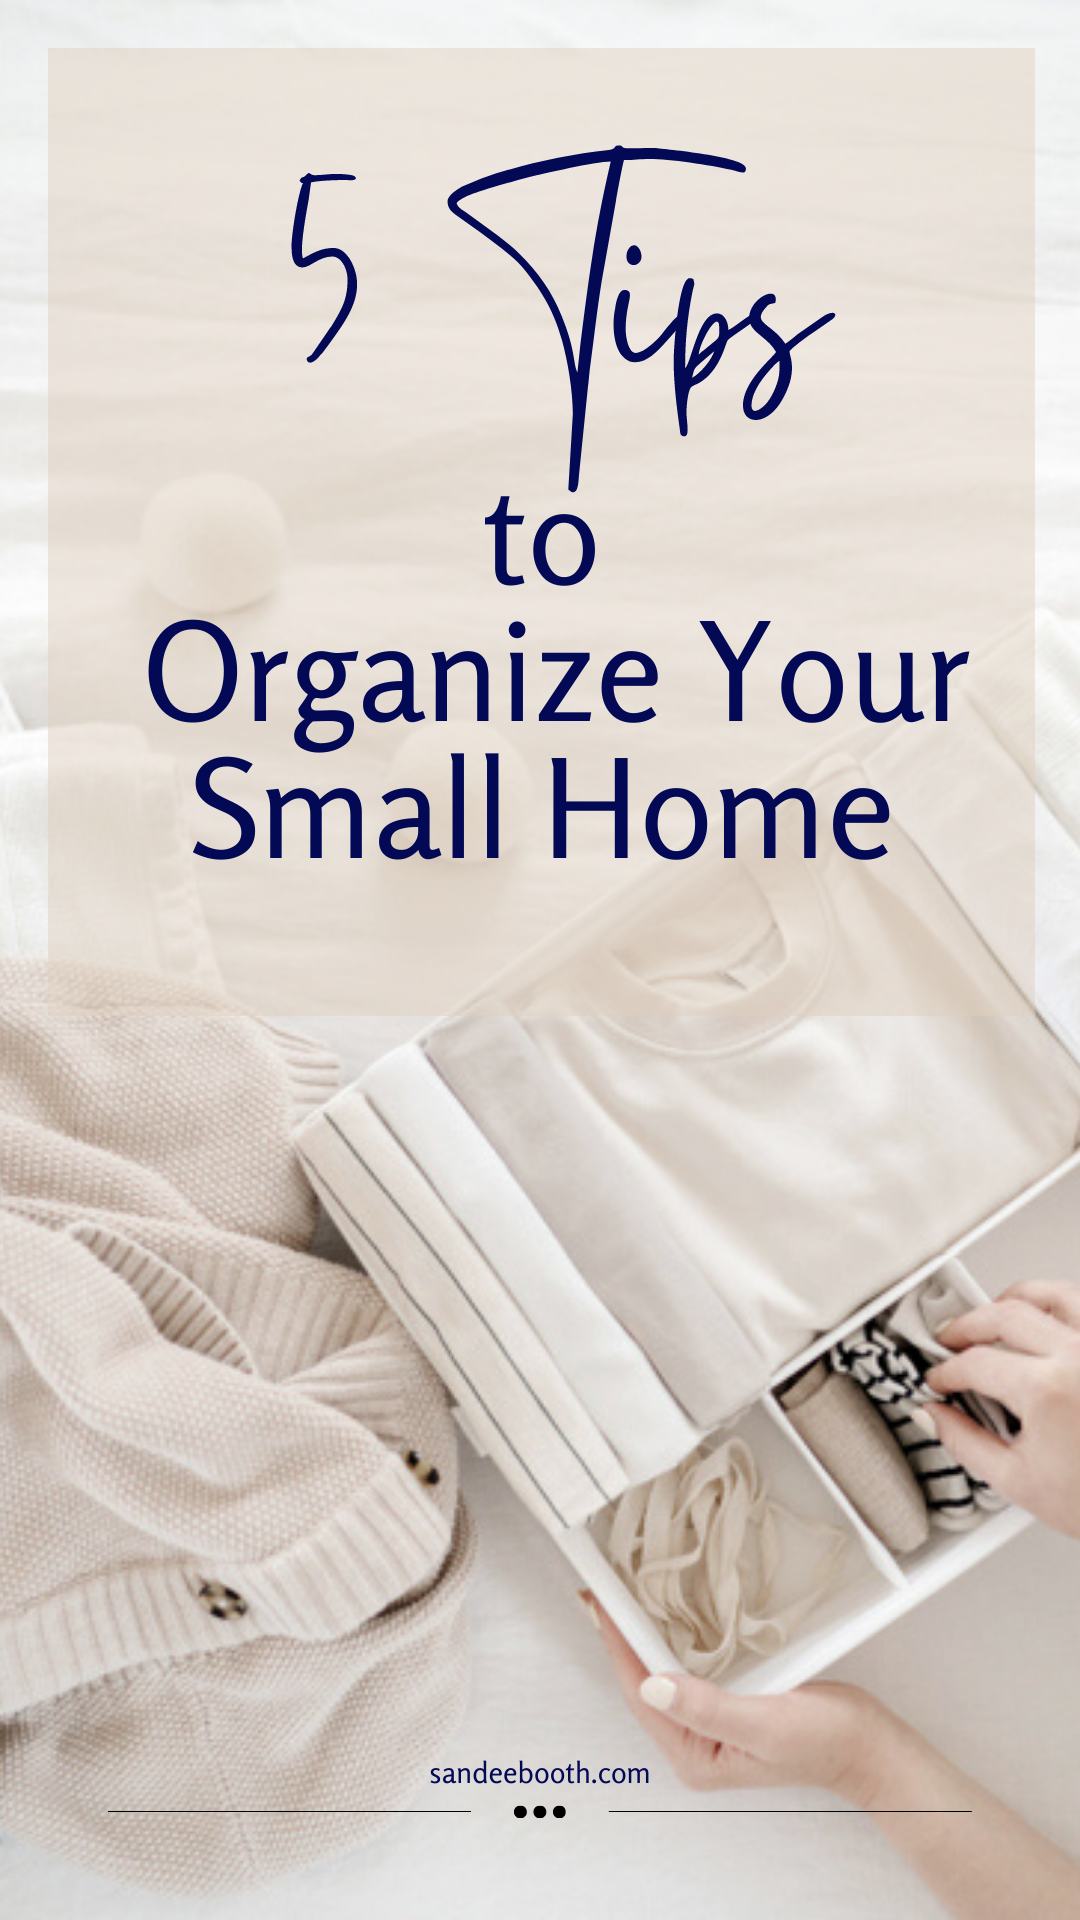 5 tips to organize your small home - sandee booth